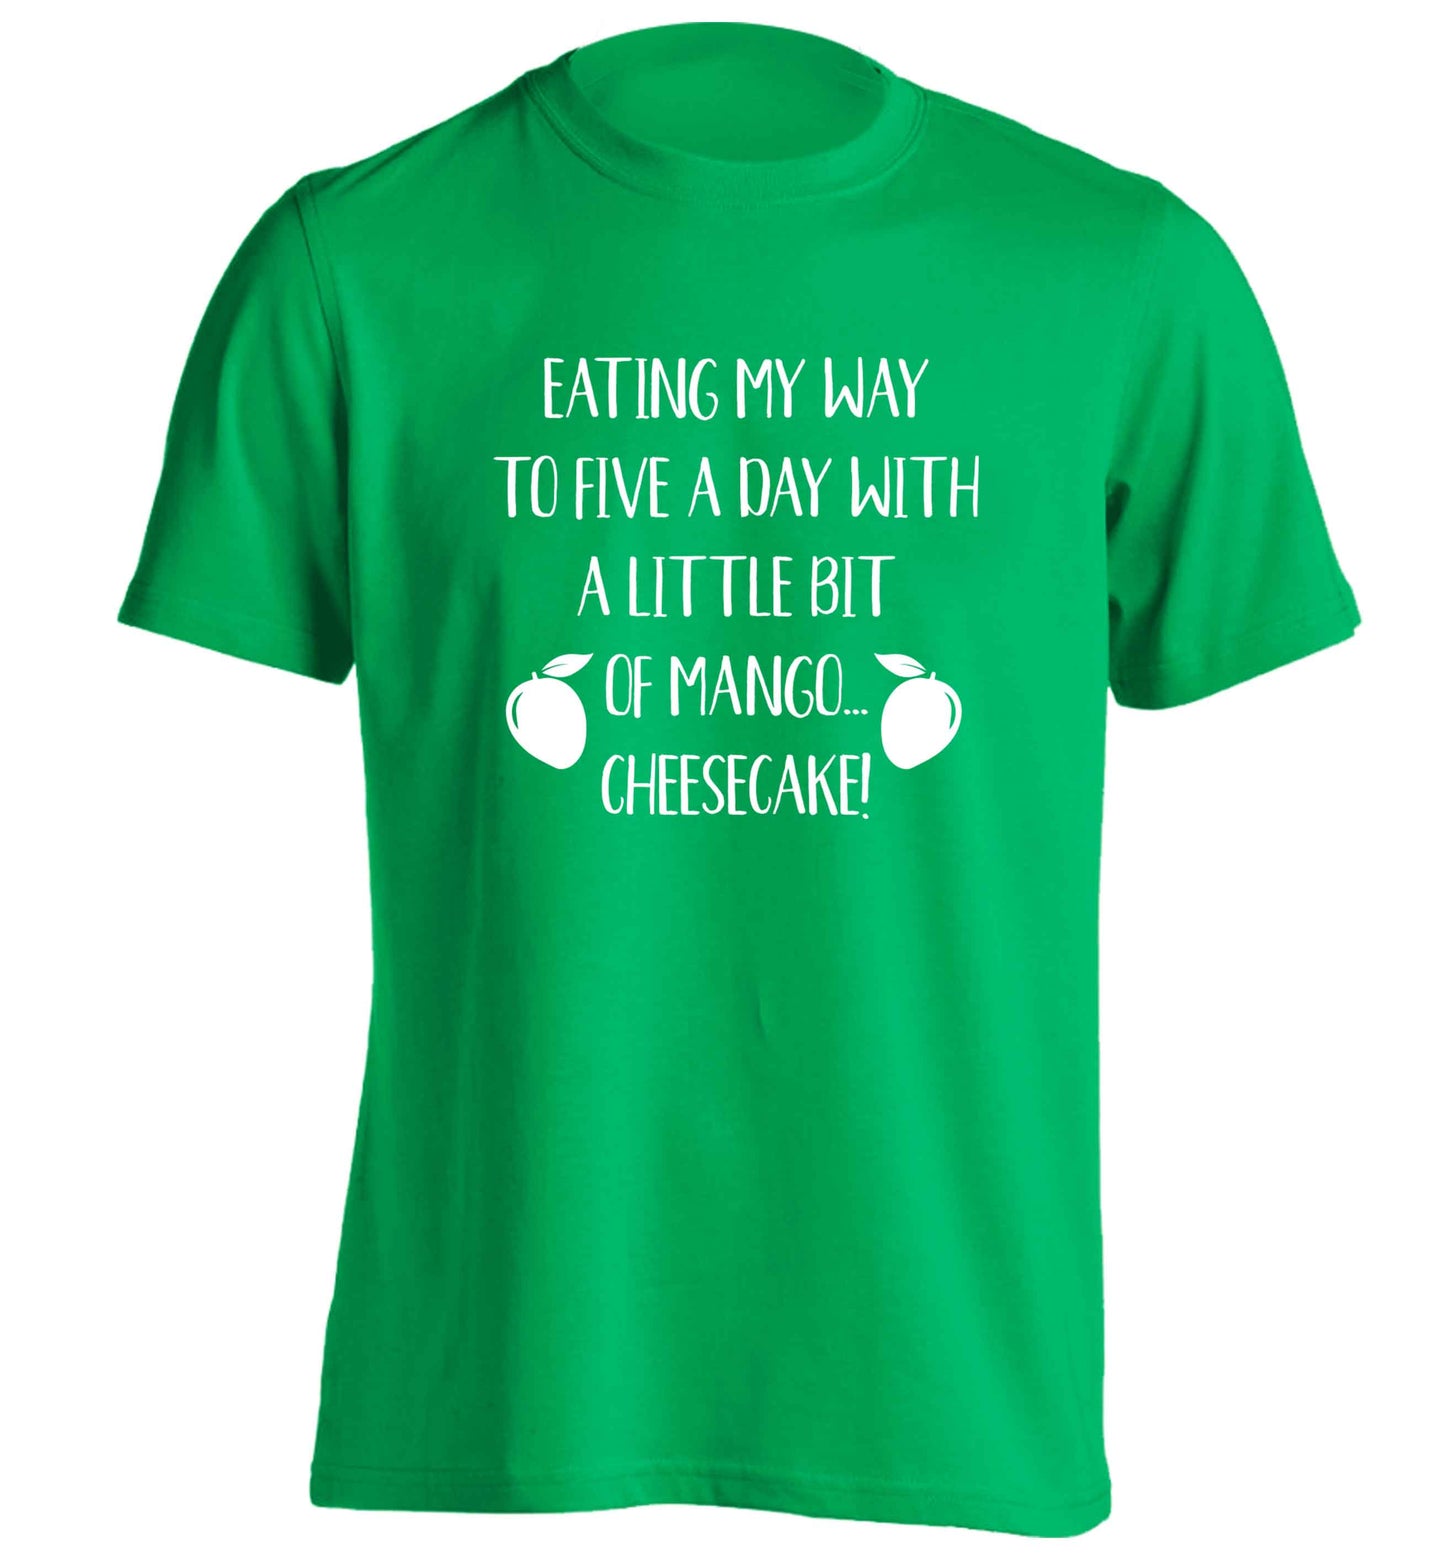 Eating my way to five a day with a little bit of mango cheesecake adults unisex green Tshirt 2XL